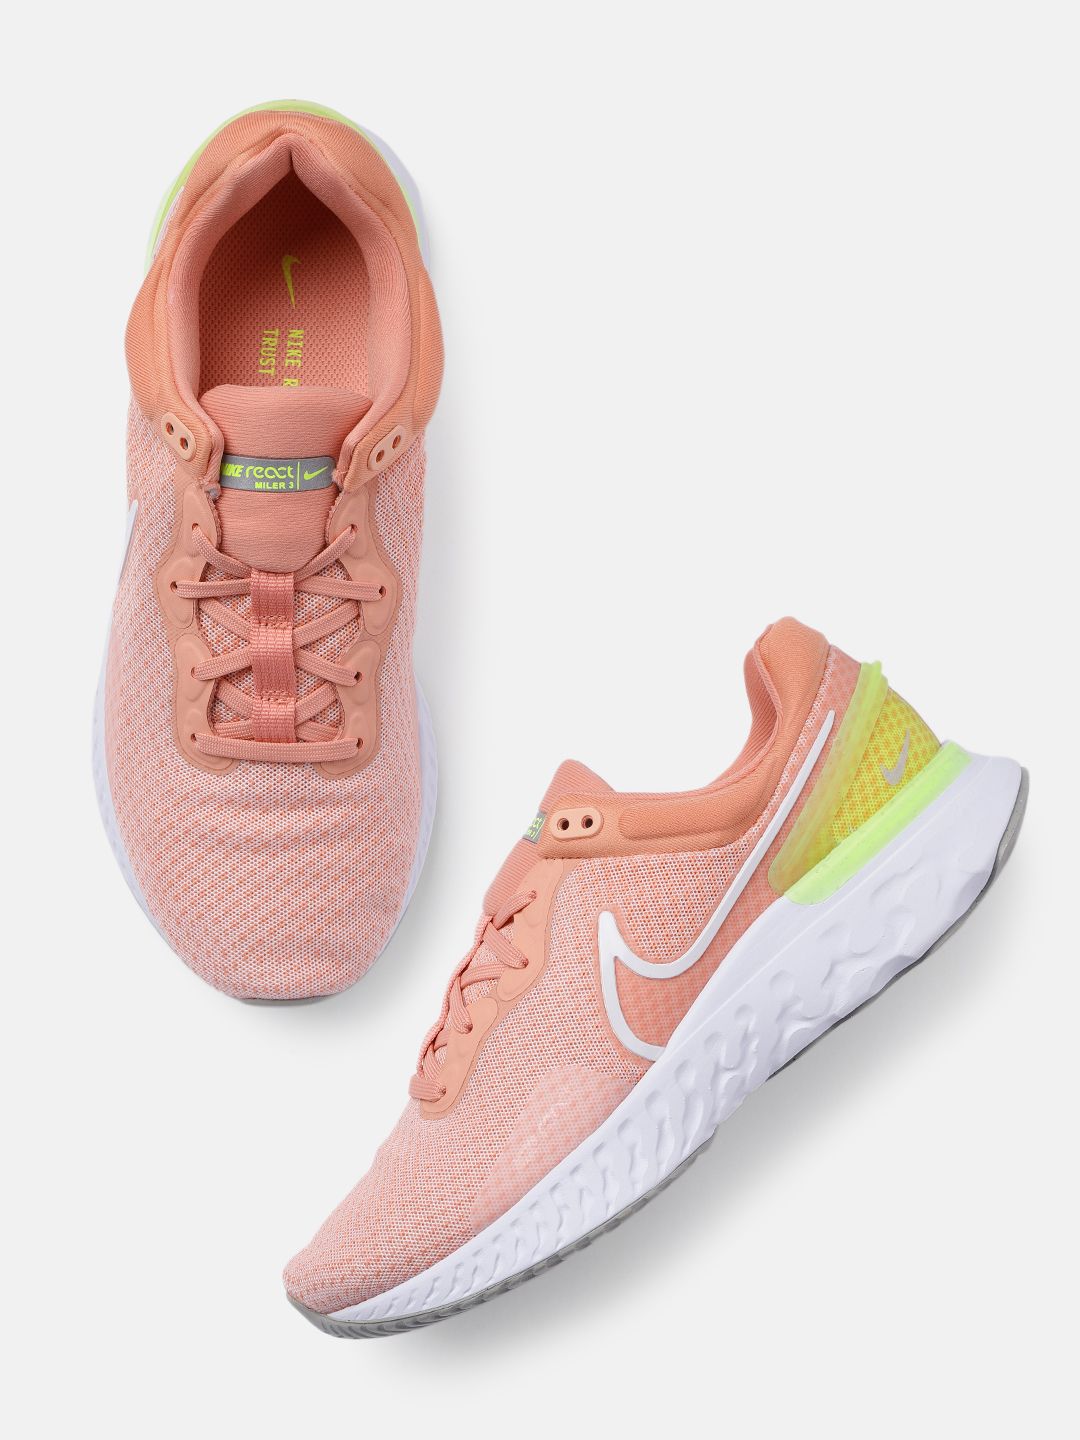 Nike Women Peach-Coloured React Miler 3 Running Shoes Price in India